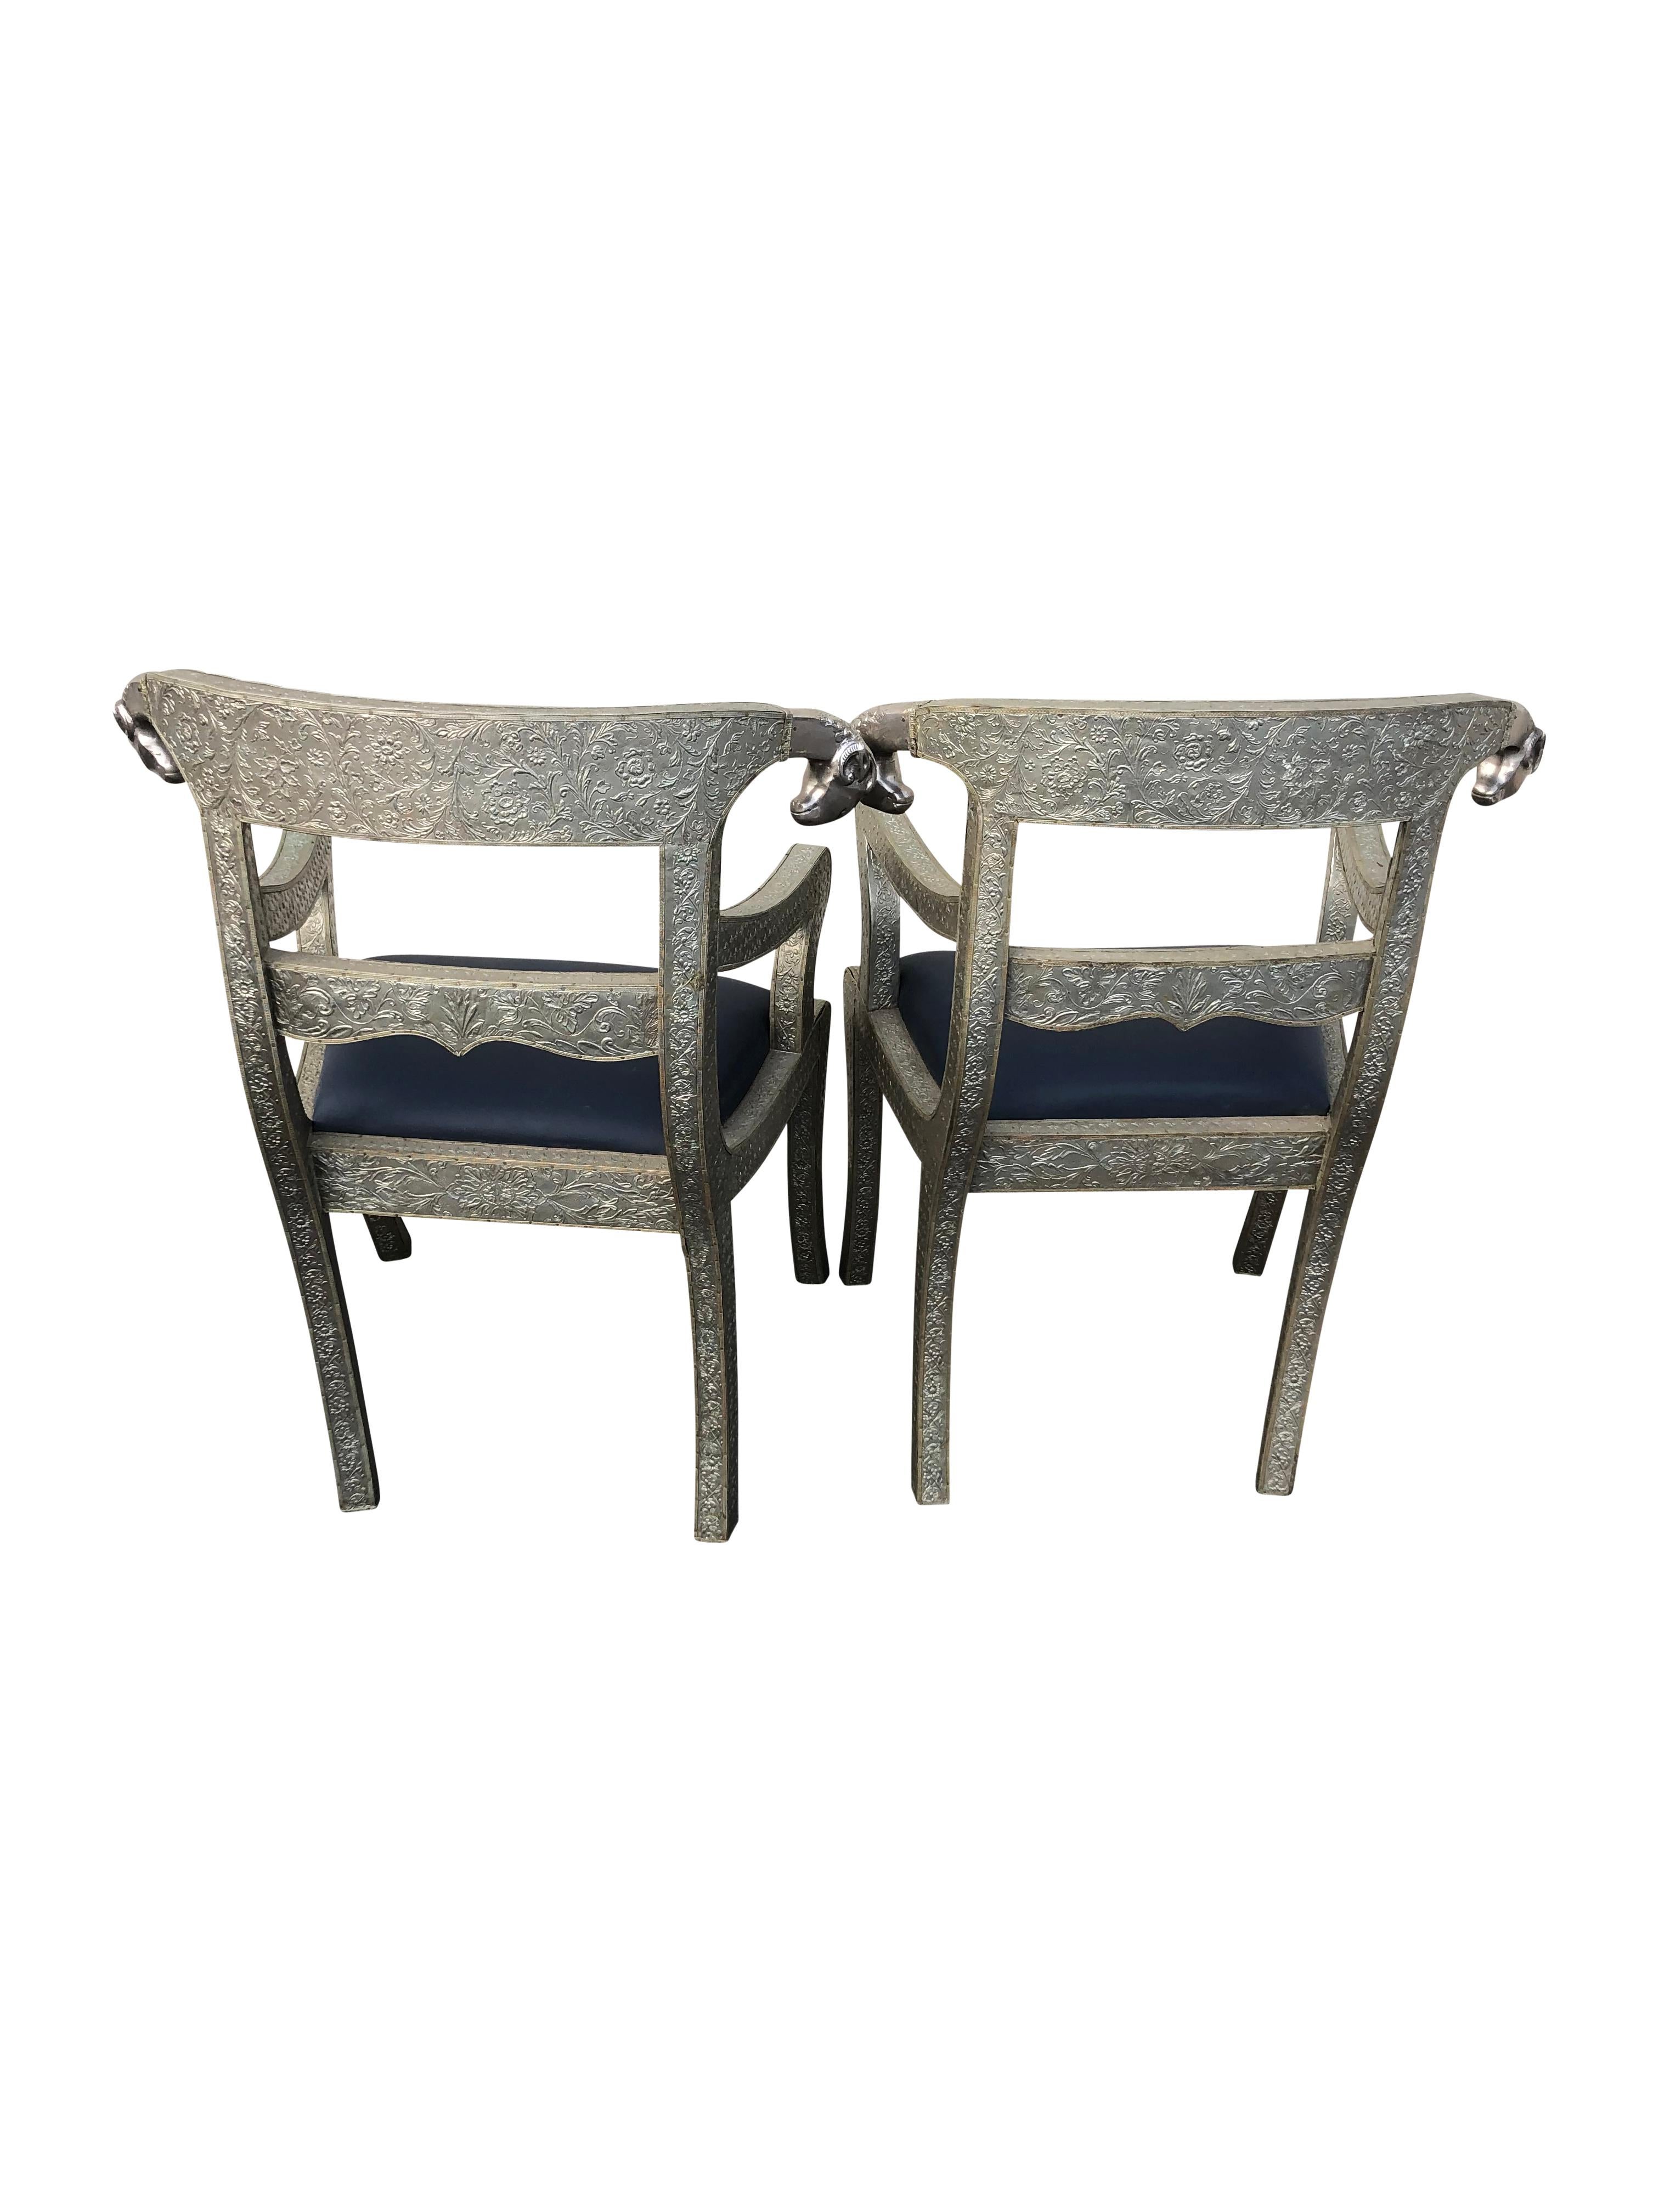 Pair of Anglo Indian Silver Metal Clad Armchairs With Rams Heads. For Sale 12